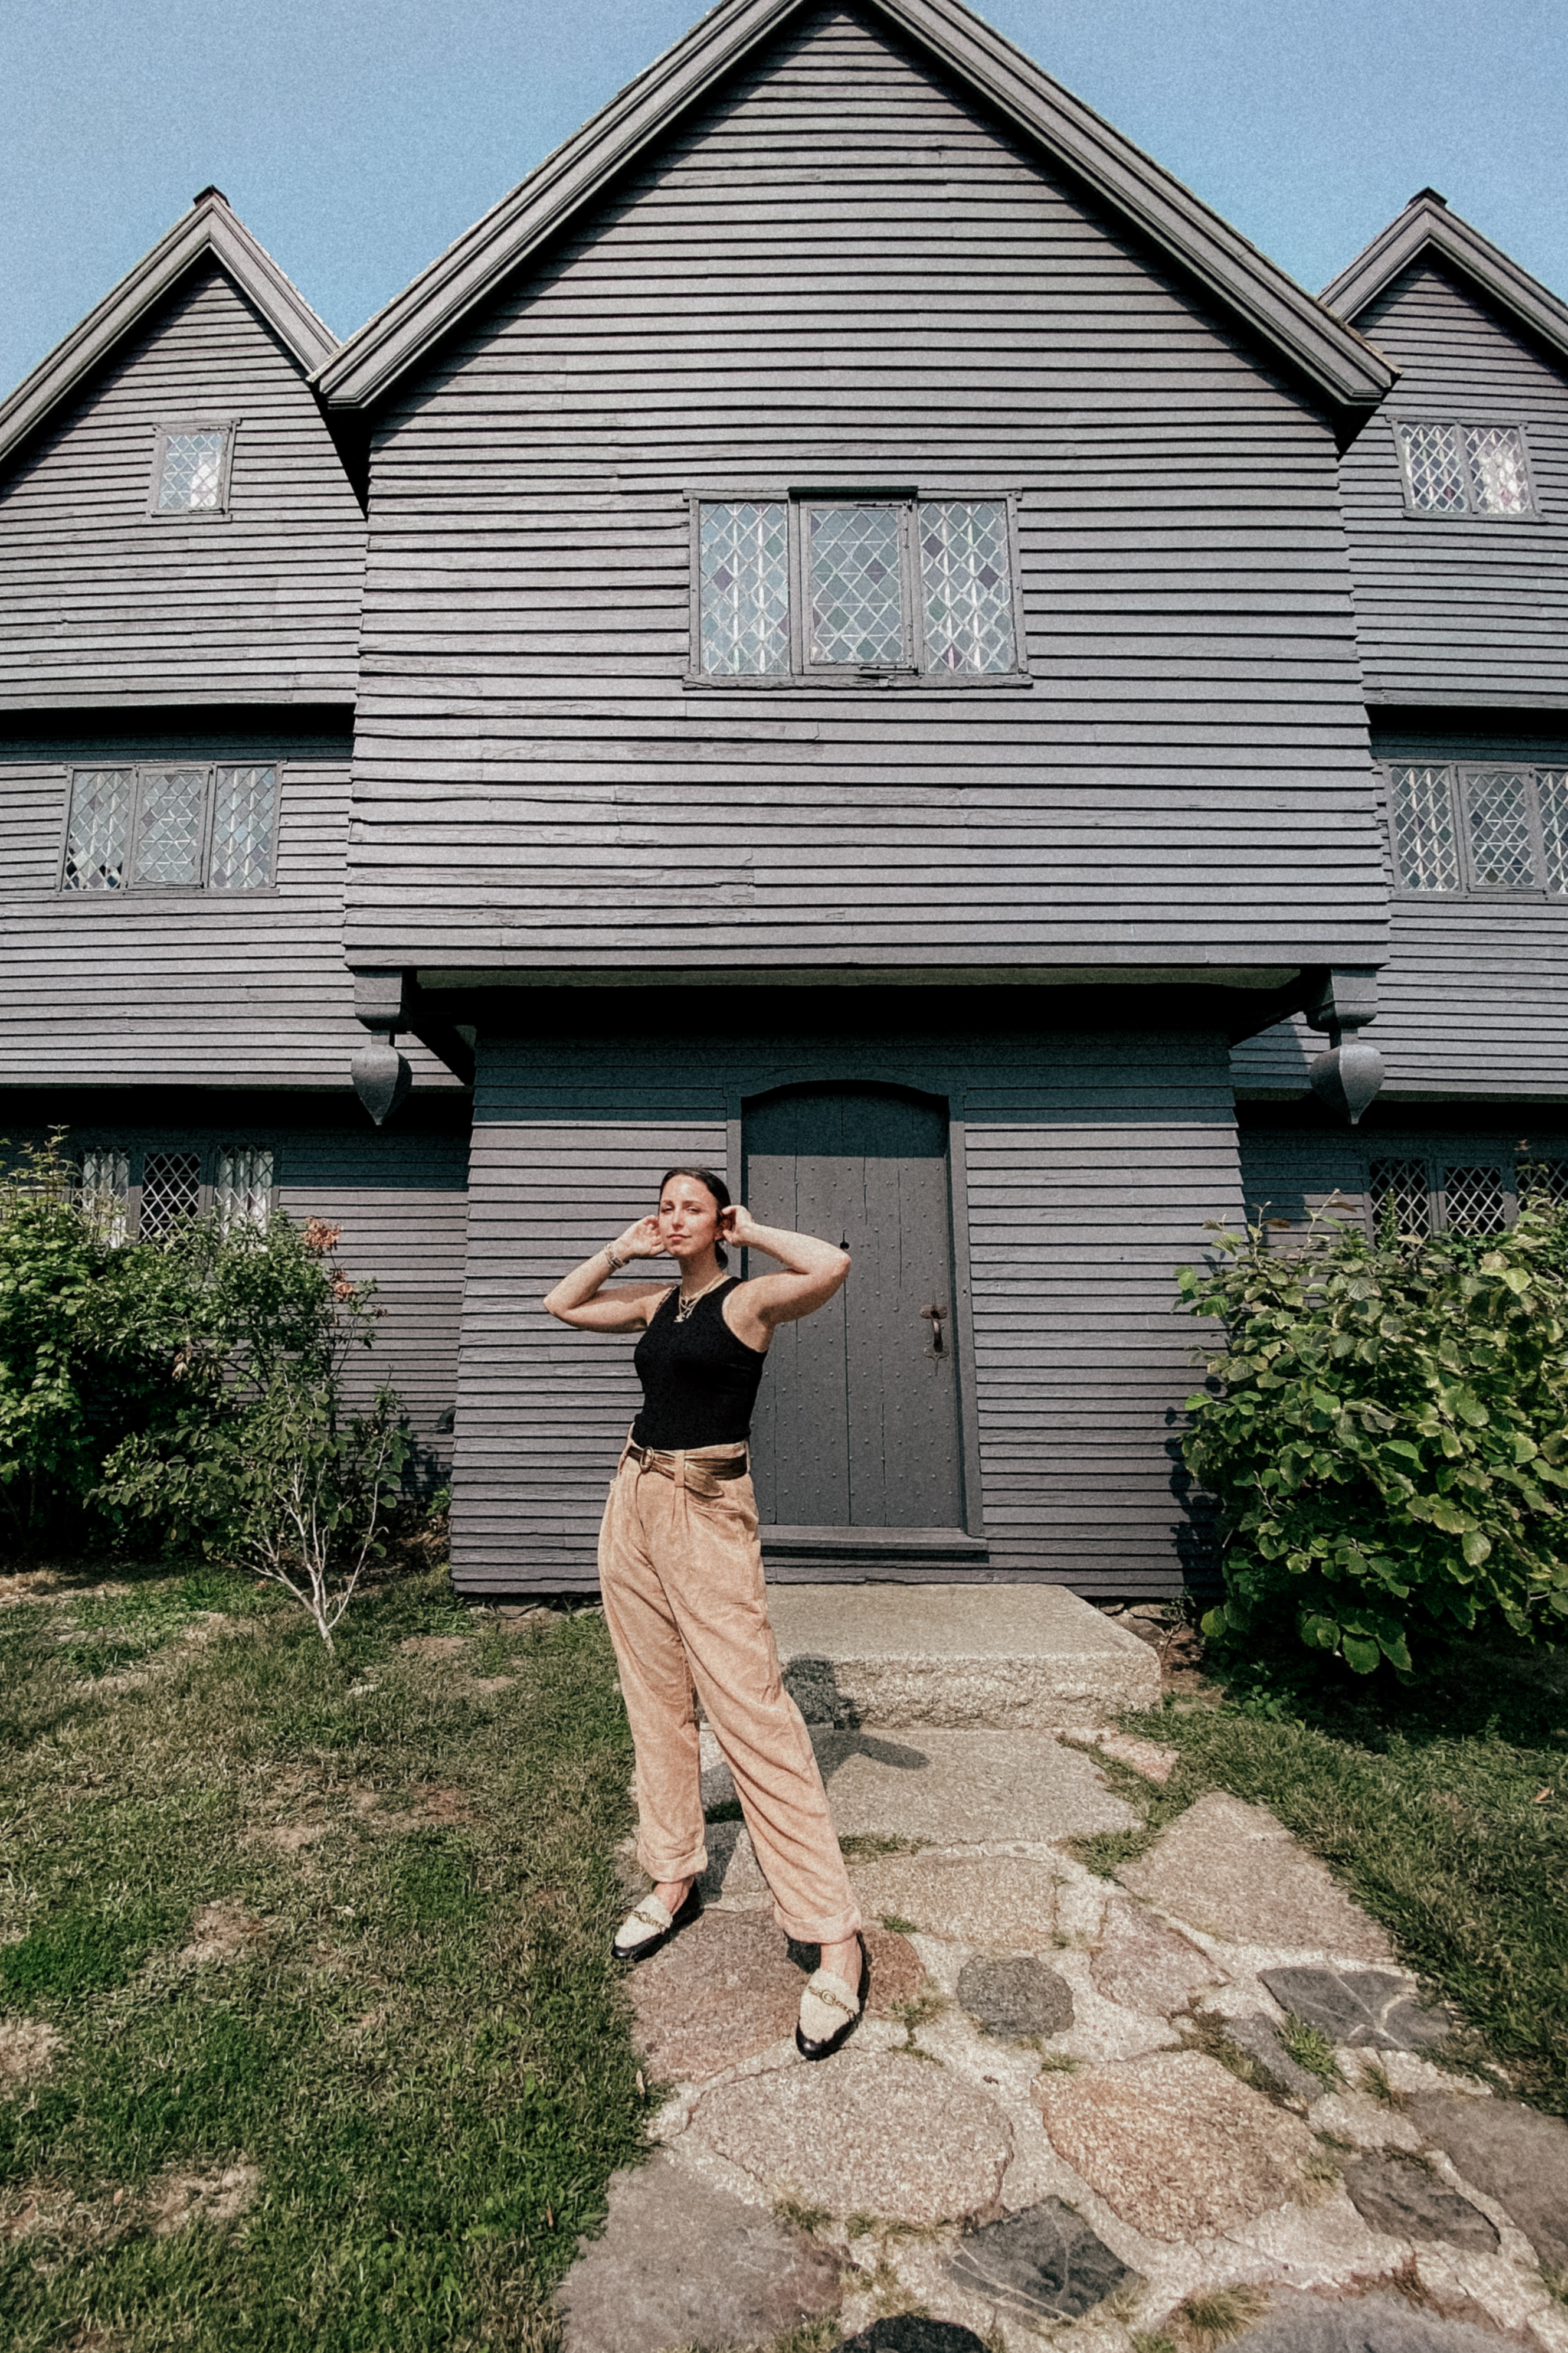 Overnight Stay in Massachusetts - Salem, MA & Lexington, MA - Fall Outfit - Witches House in Salem Massachusetts - Simply by Simone - Simone Piliero Arena #salem #salemma #salemmassachusetts #newengland #newenglandtravel #halloween #falltravel #northeasttravel #travel #travelguide #witchhouse #witches